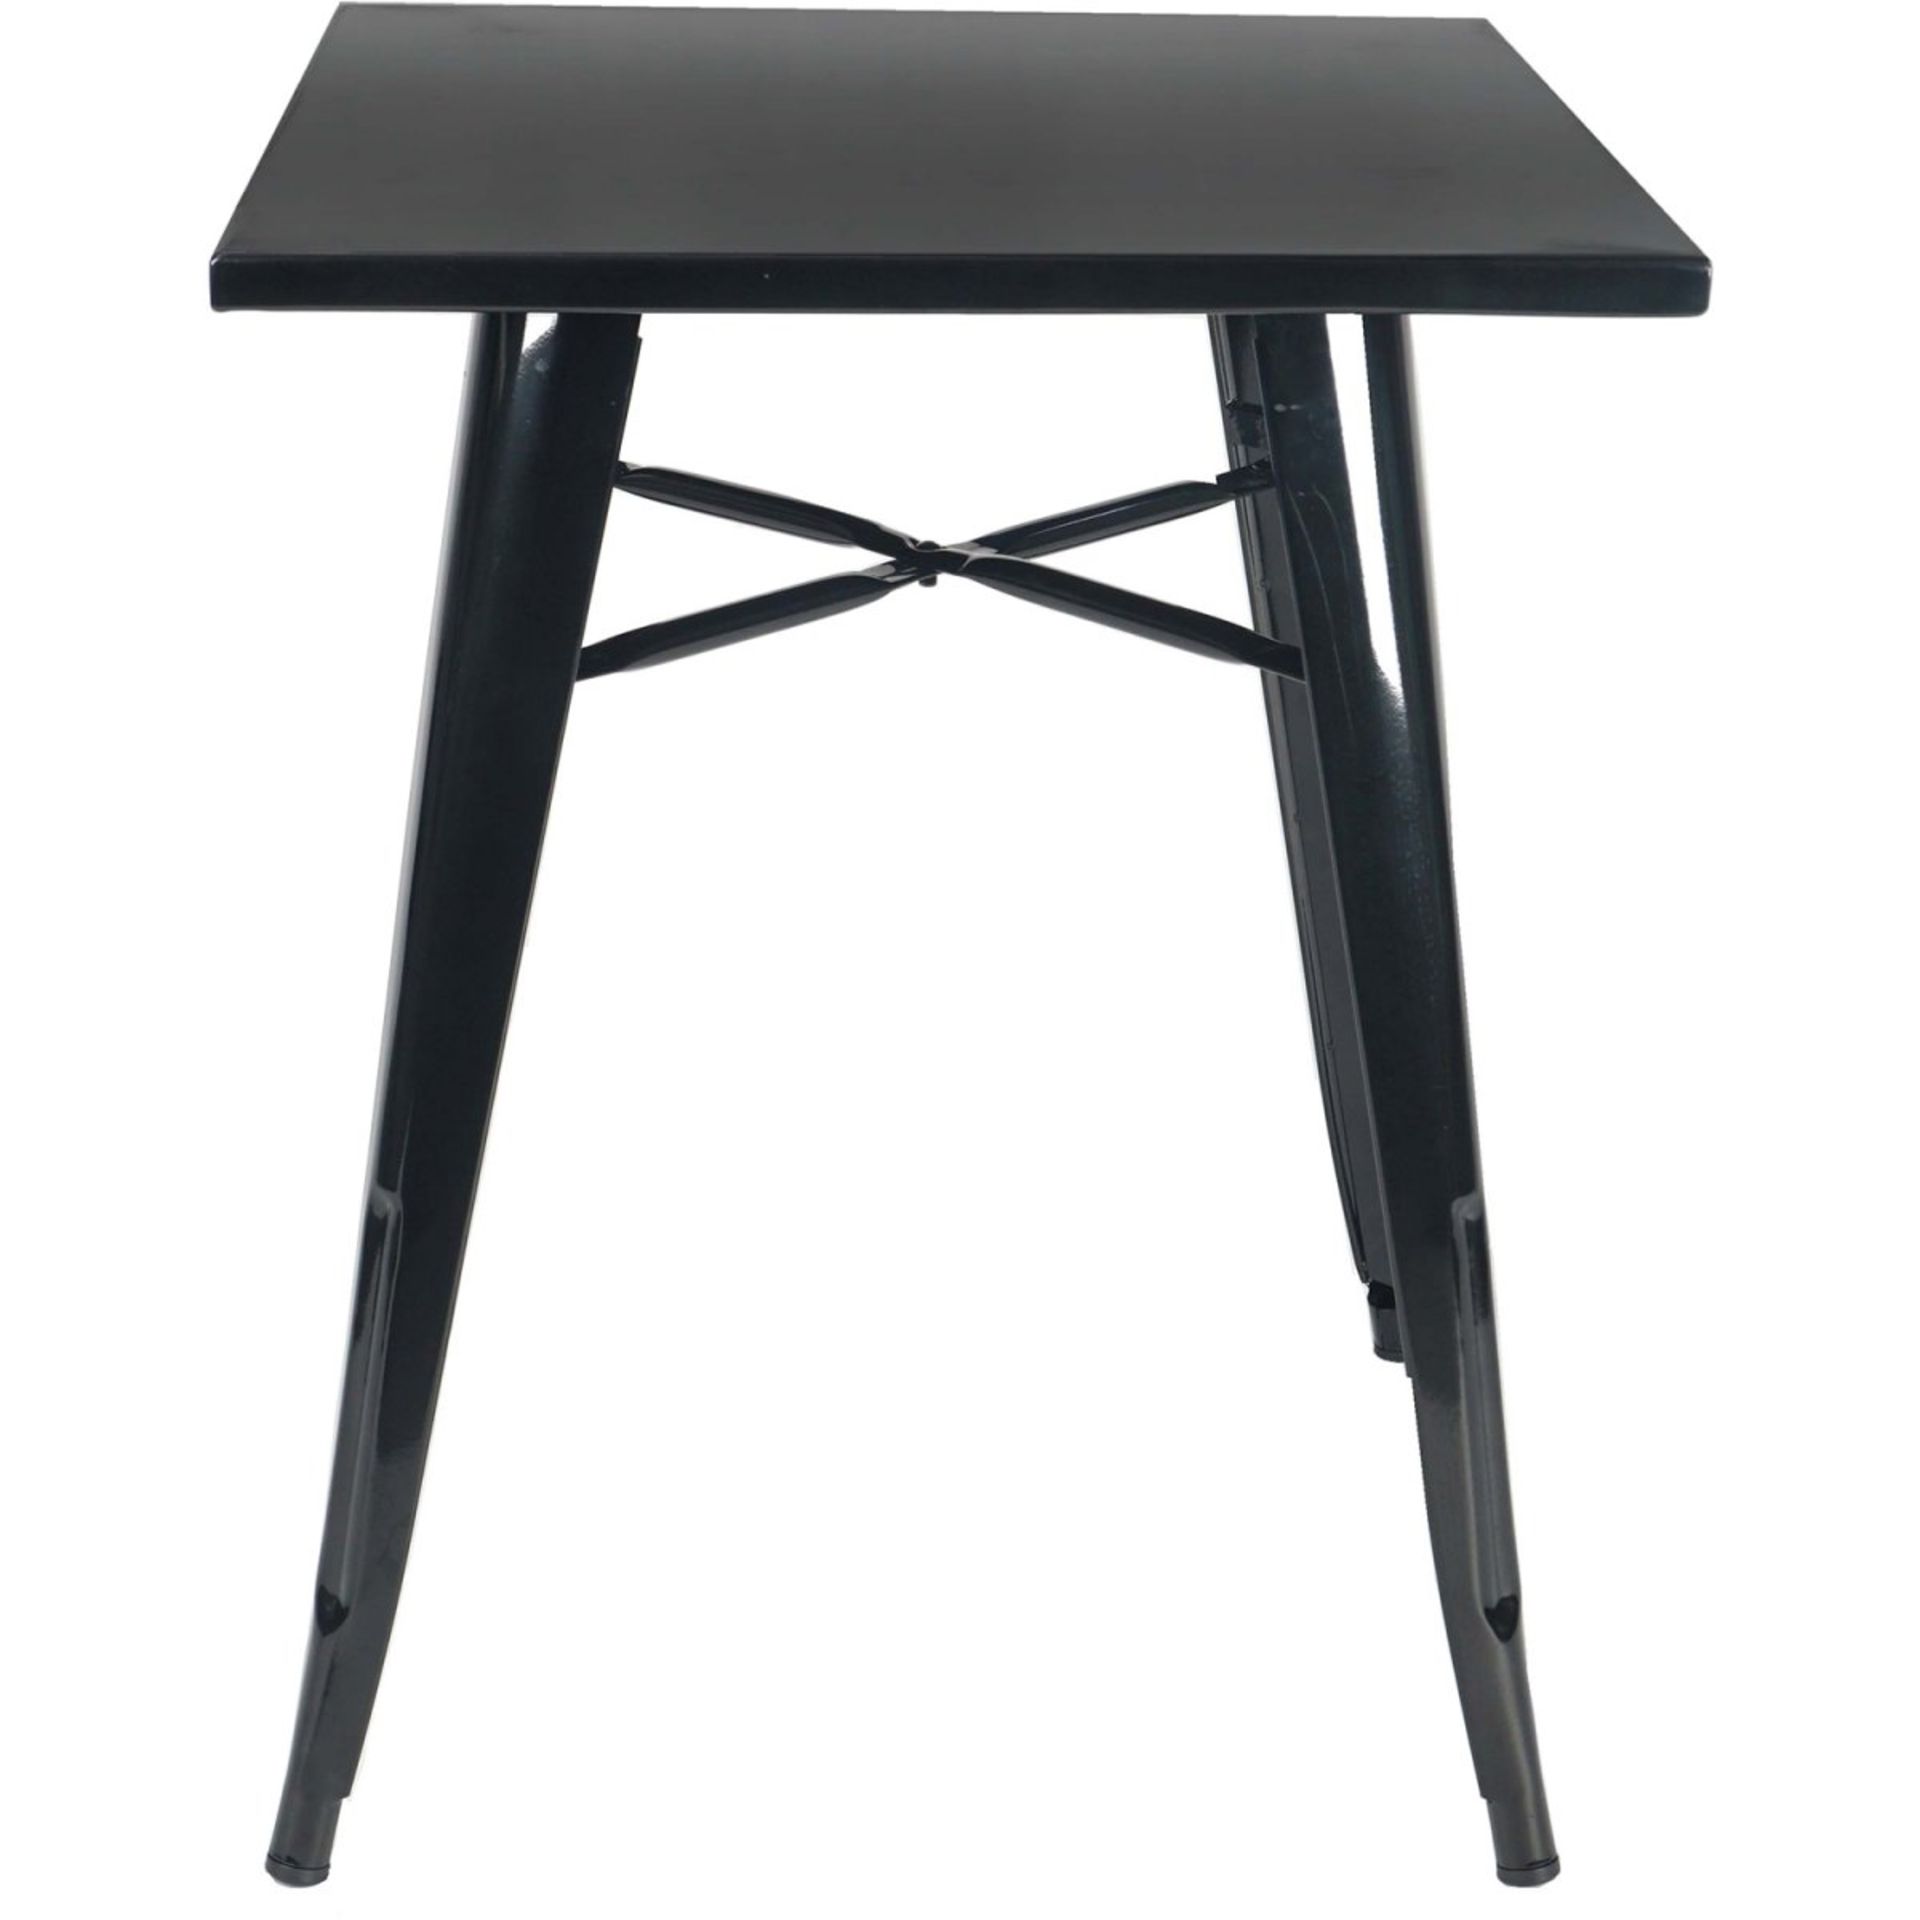 1 x Tolix Industrial Style Outdoor Bistro Table and Chair Set in Black - Includes 1 x Table and 4 - Image 4 of 7